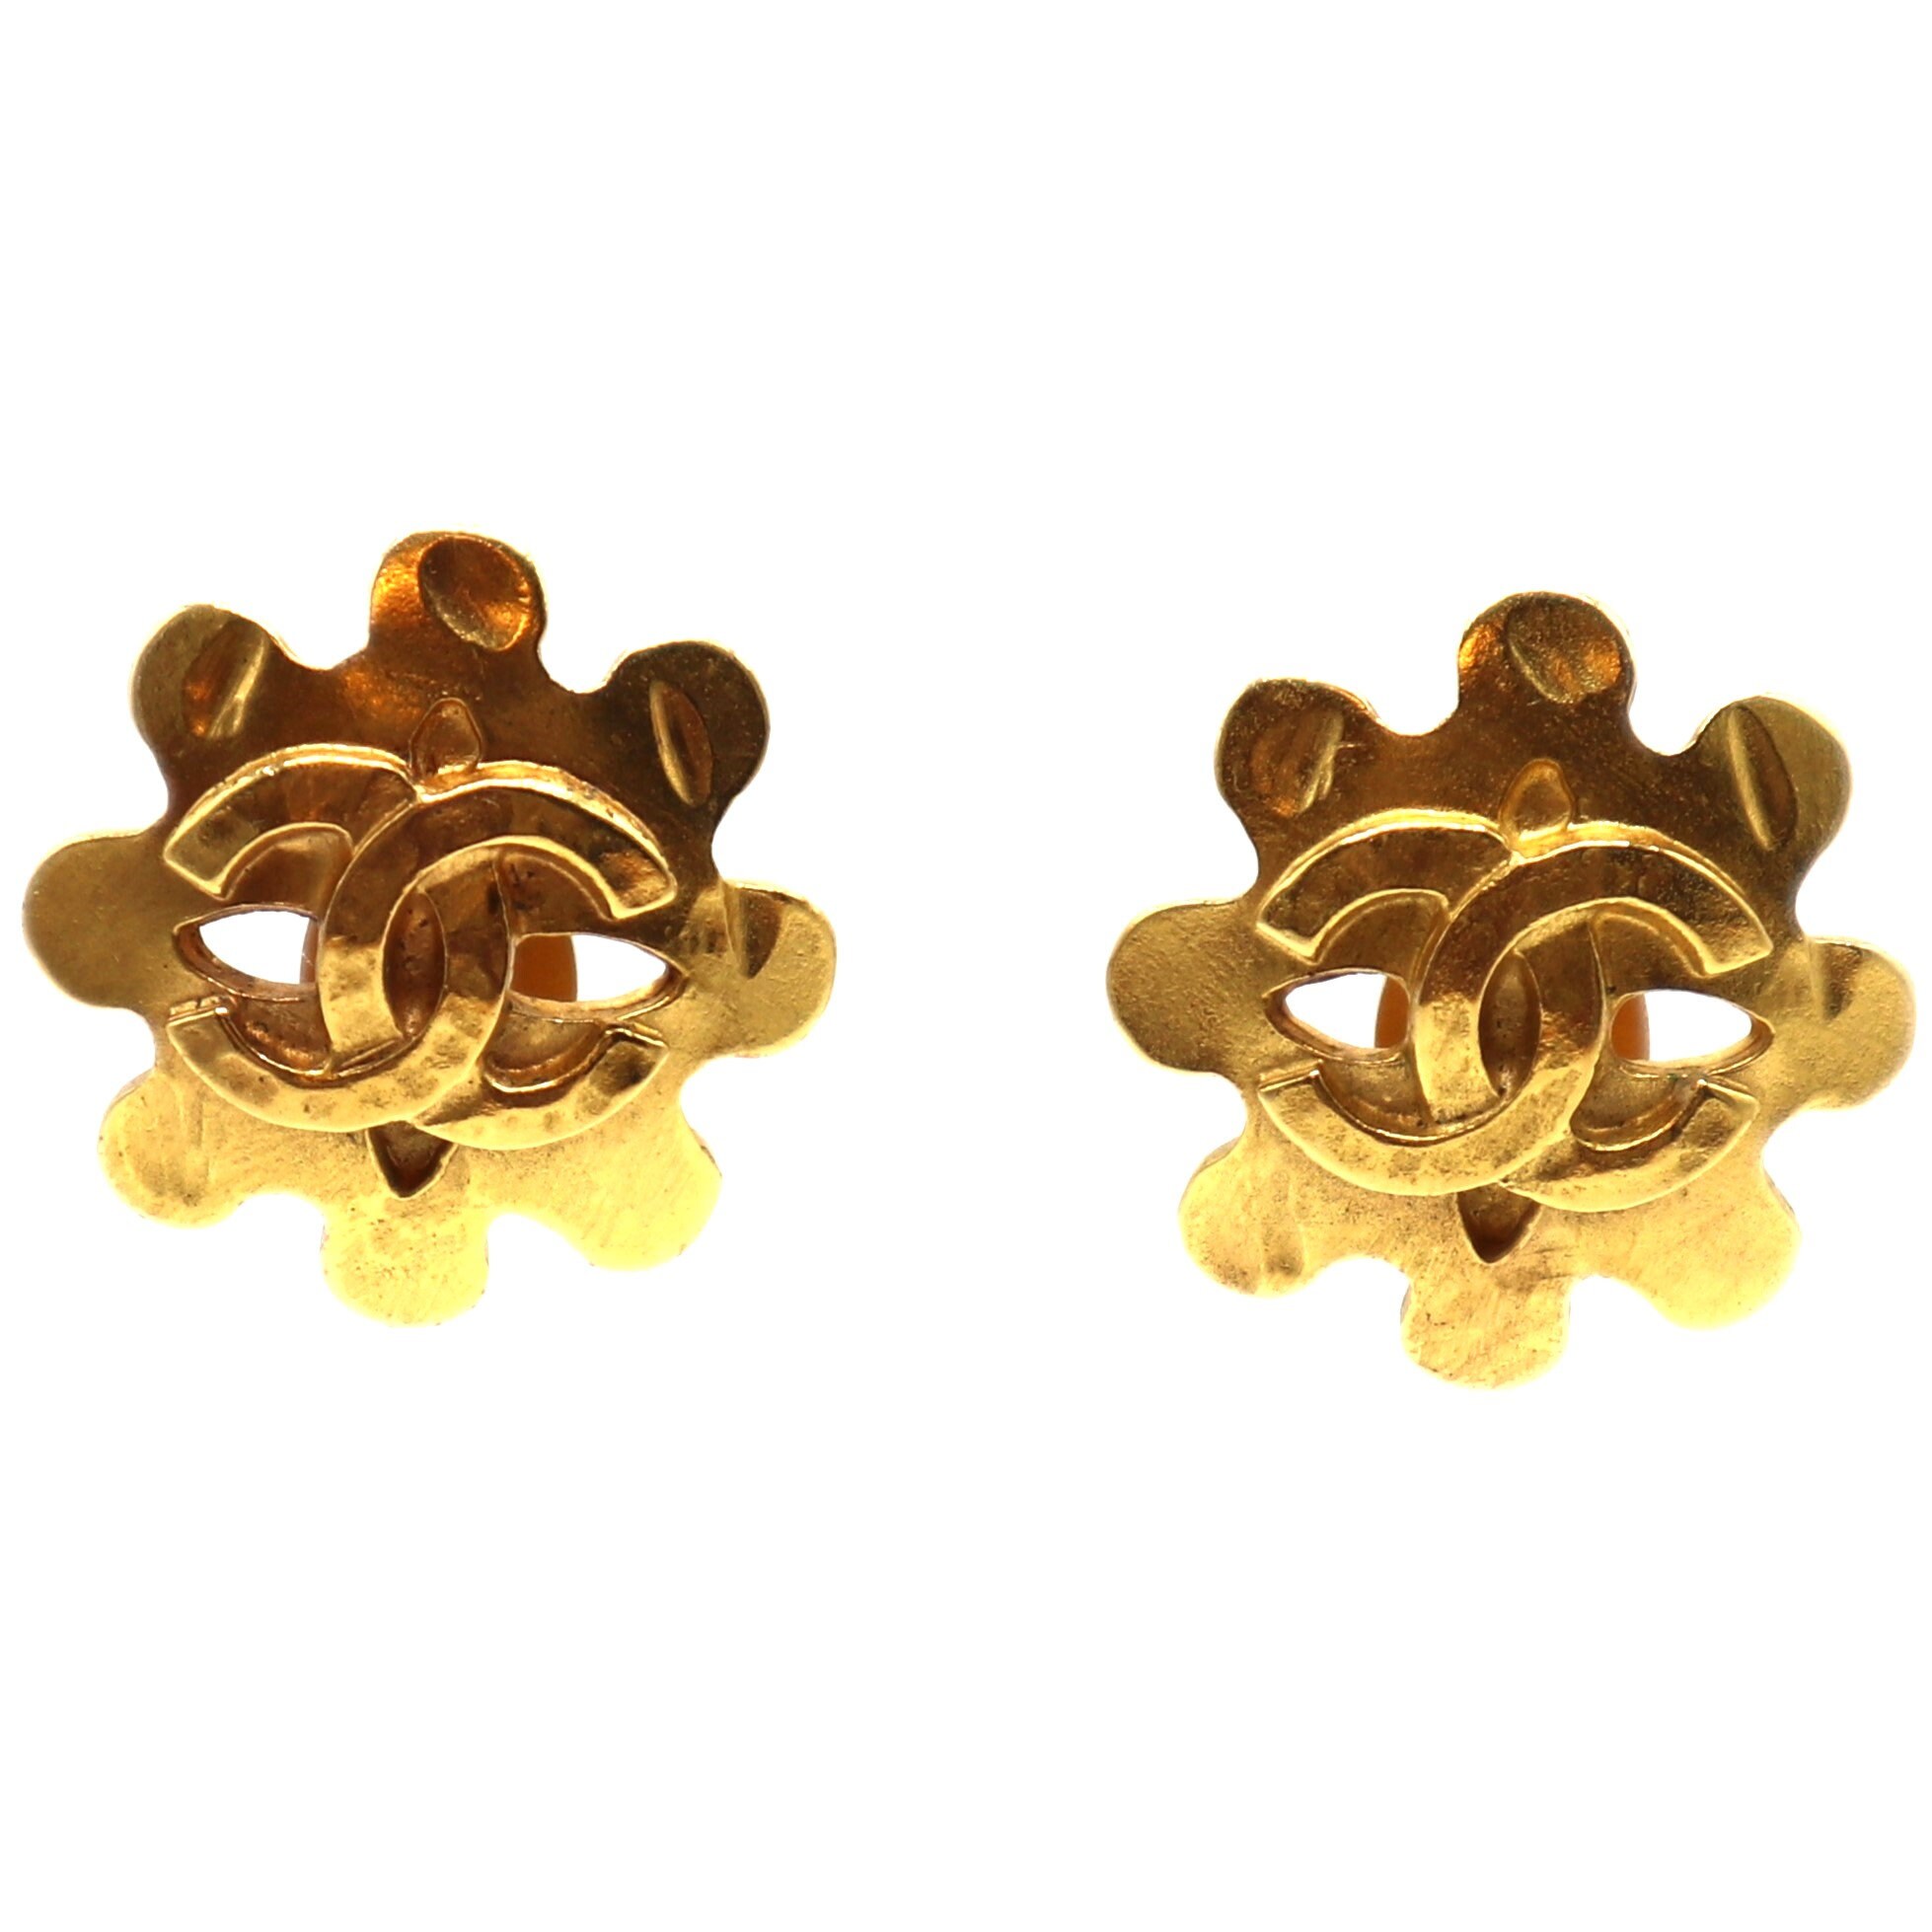 Chanel Gold Metal CC Logo Woven Dome Earrings, 1984-1992, Fashion | Clip-On Earrings, Vintage Jewelry (Very Good)